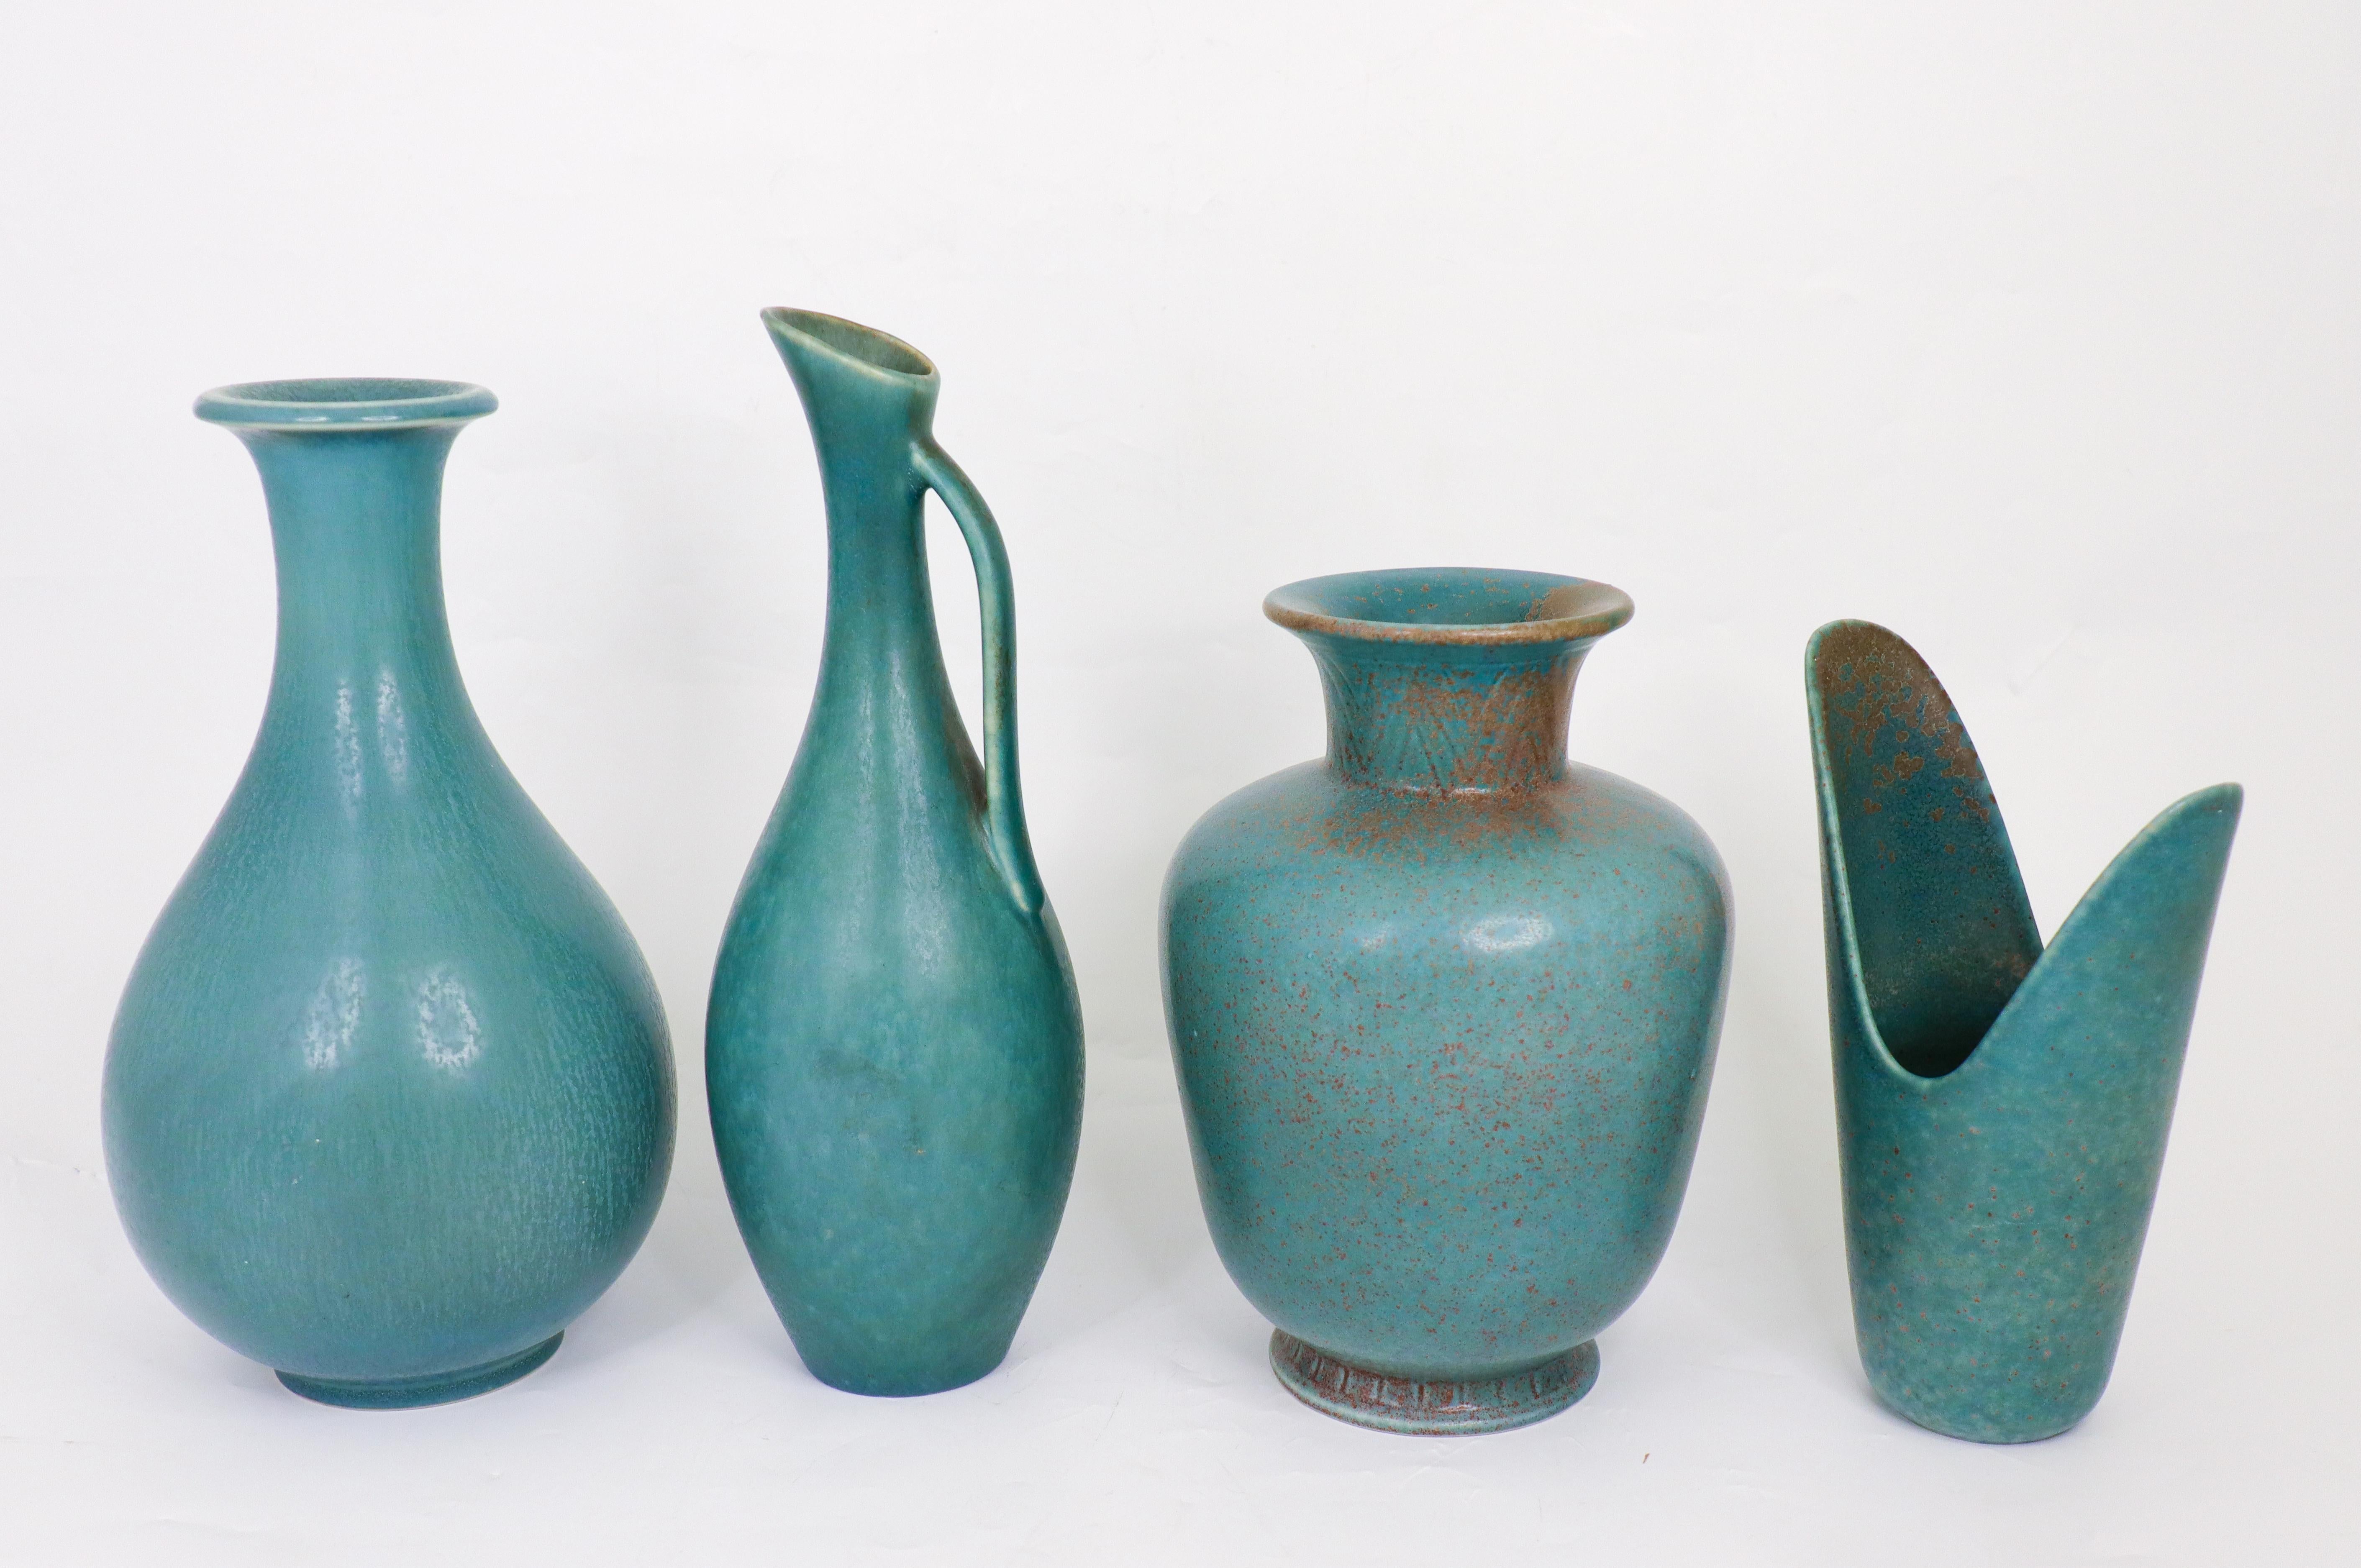 Swedish Group of 4 Green / Turquoise Ceramic Vases - Rörstrand - Gunnar Nylund -  For Sale